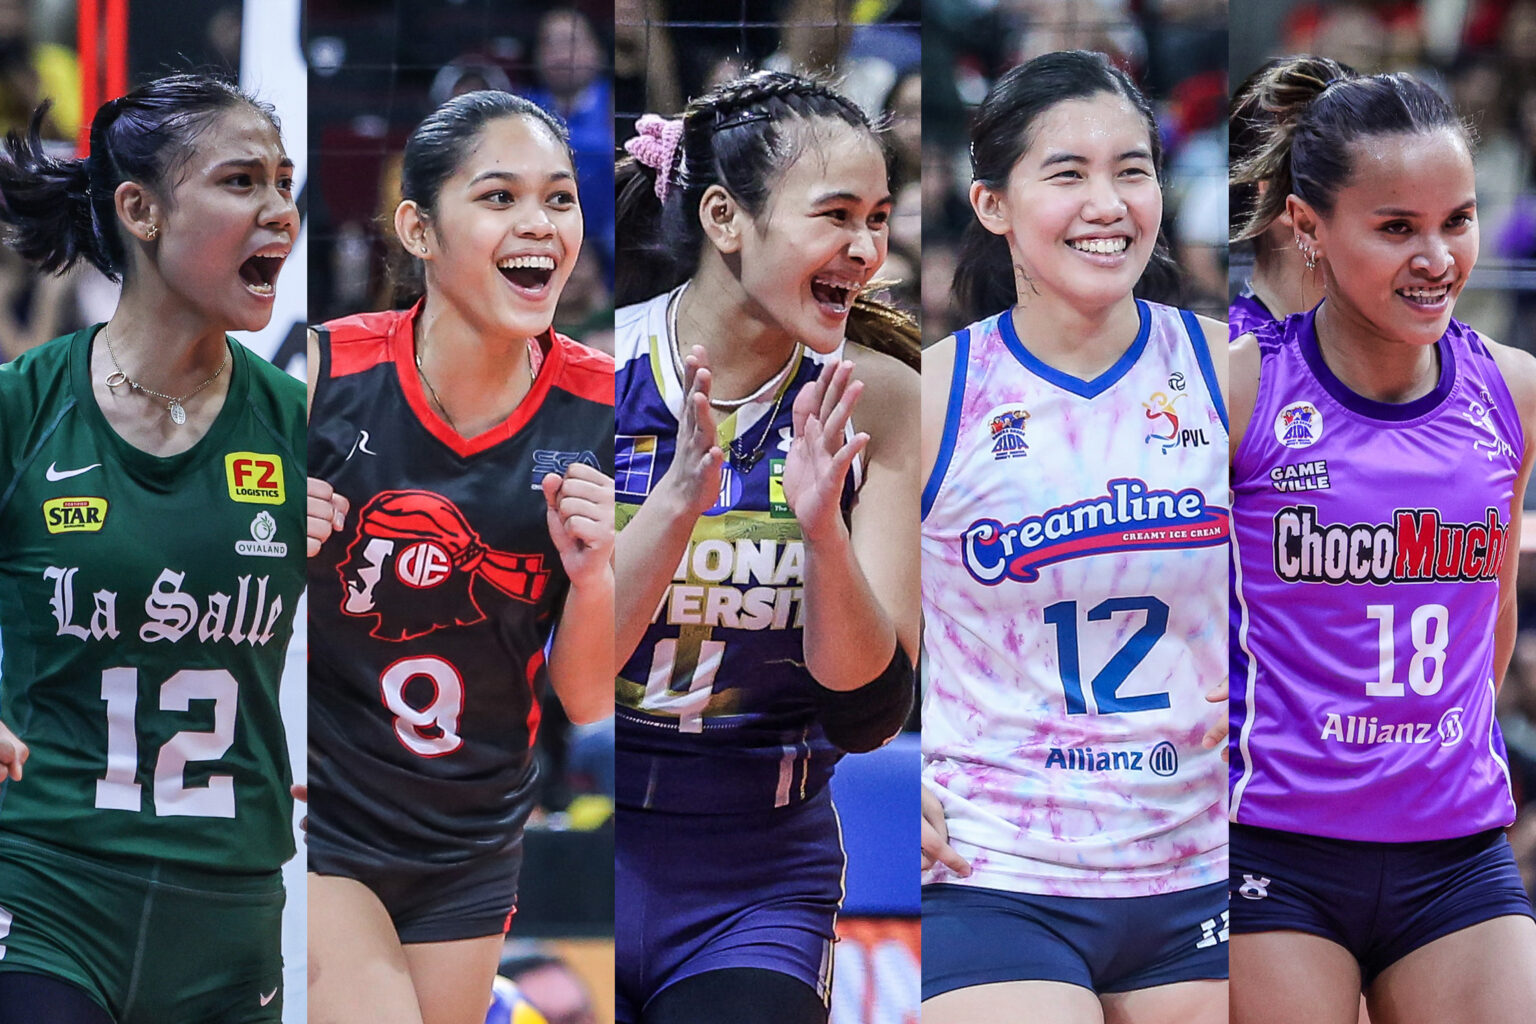 Angel Canino, Bella Belen commit to play for PH team, sources say